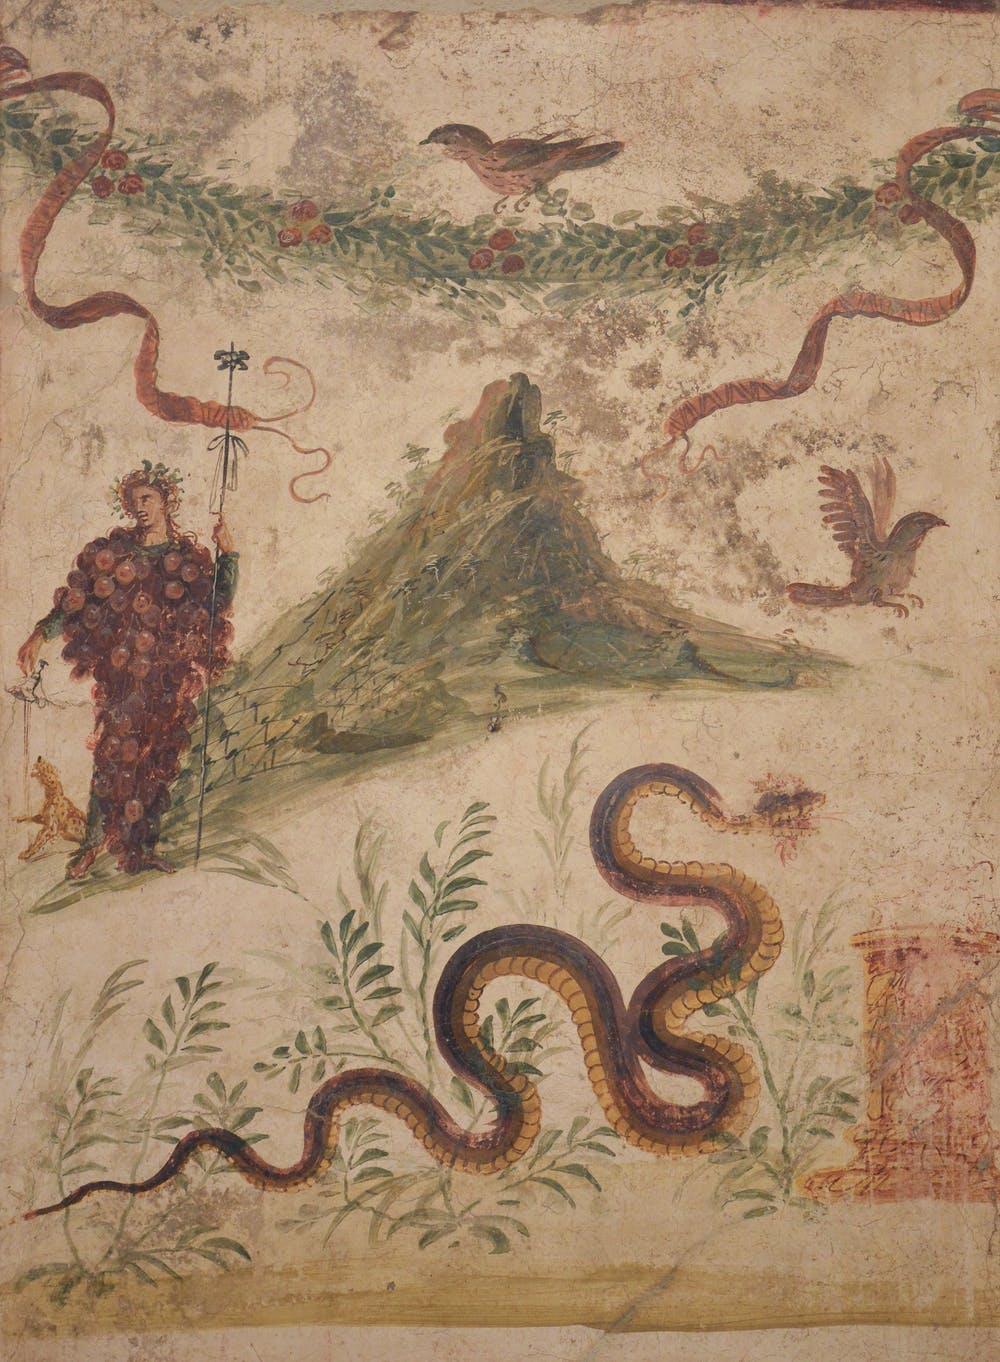 A fresco found in Pompeii, painted circa 55–79 CE, depicting Bacchus covered in grapes and Vesuvius with trellised vines in background. (Naples Archaeological Museum)